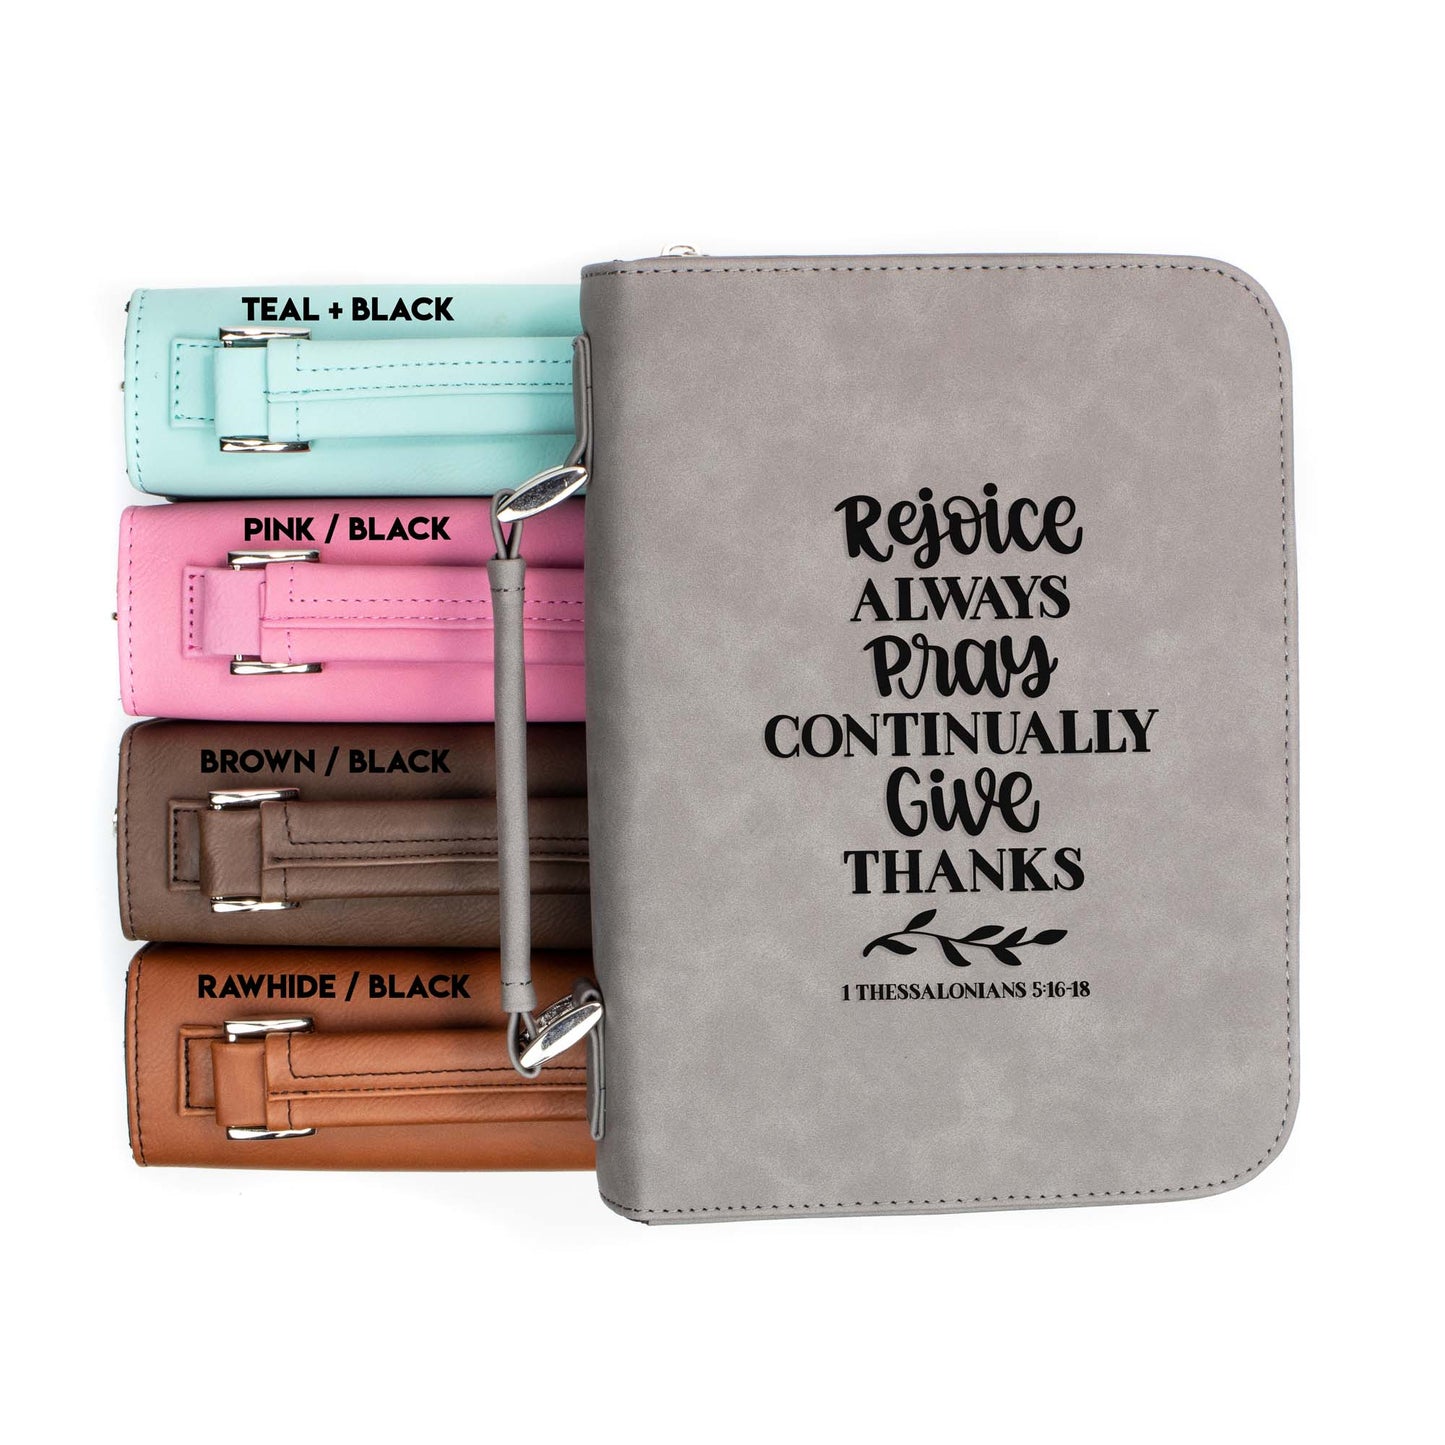 Rejoice Pray Give 1 Thessalonians 5-16-18 | Faux Leather With Handle + Pocket